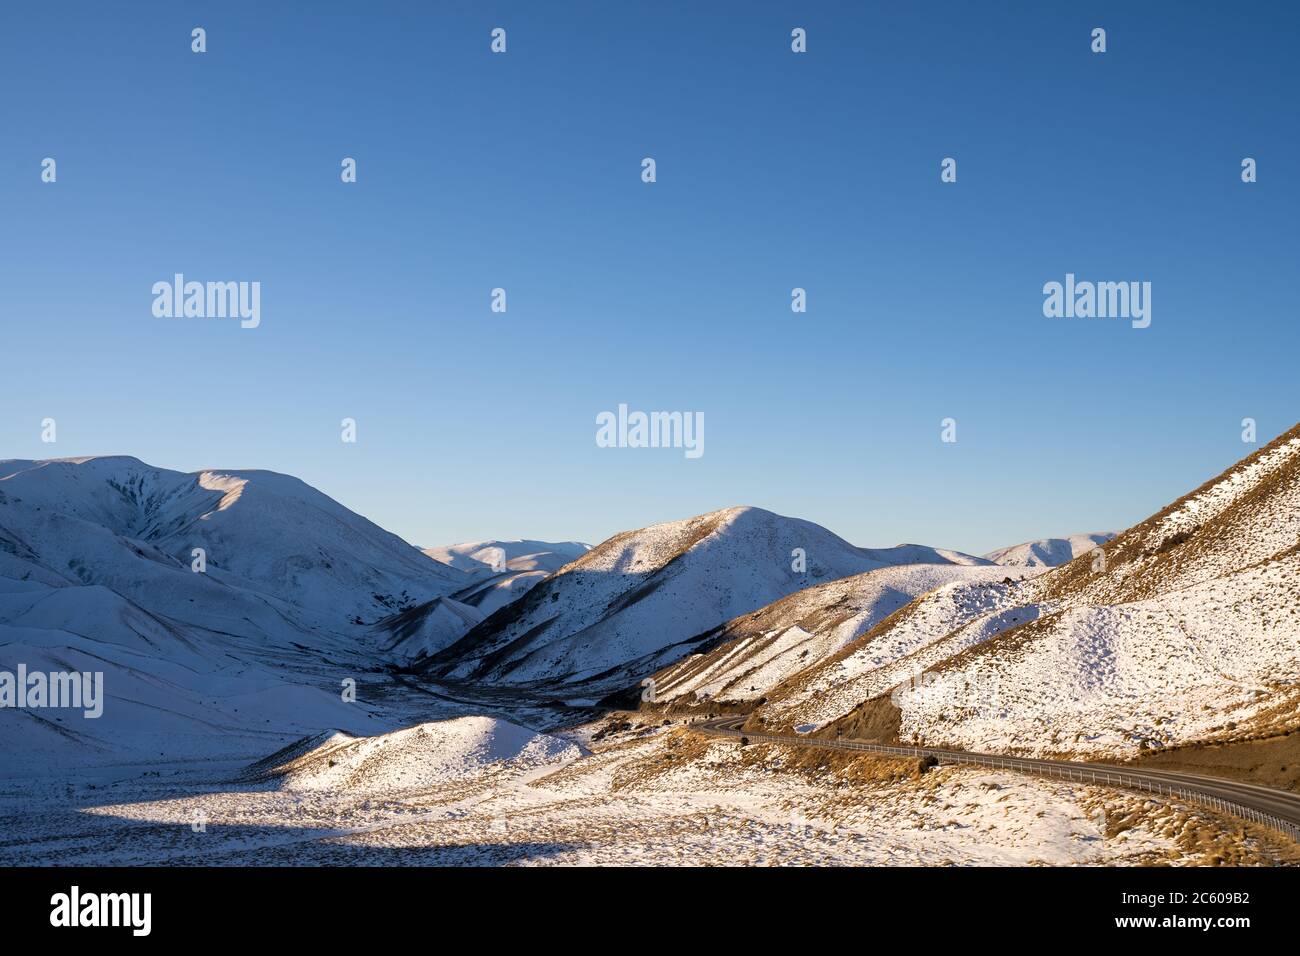 Panorama of Snow Mountain Range Landscape with Blue Sky background from New Zealand. Stock Photo